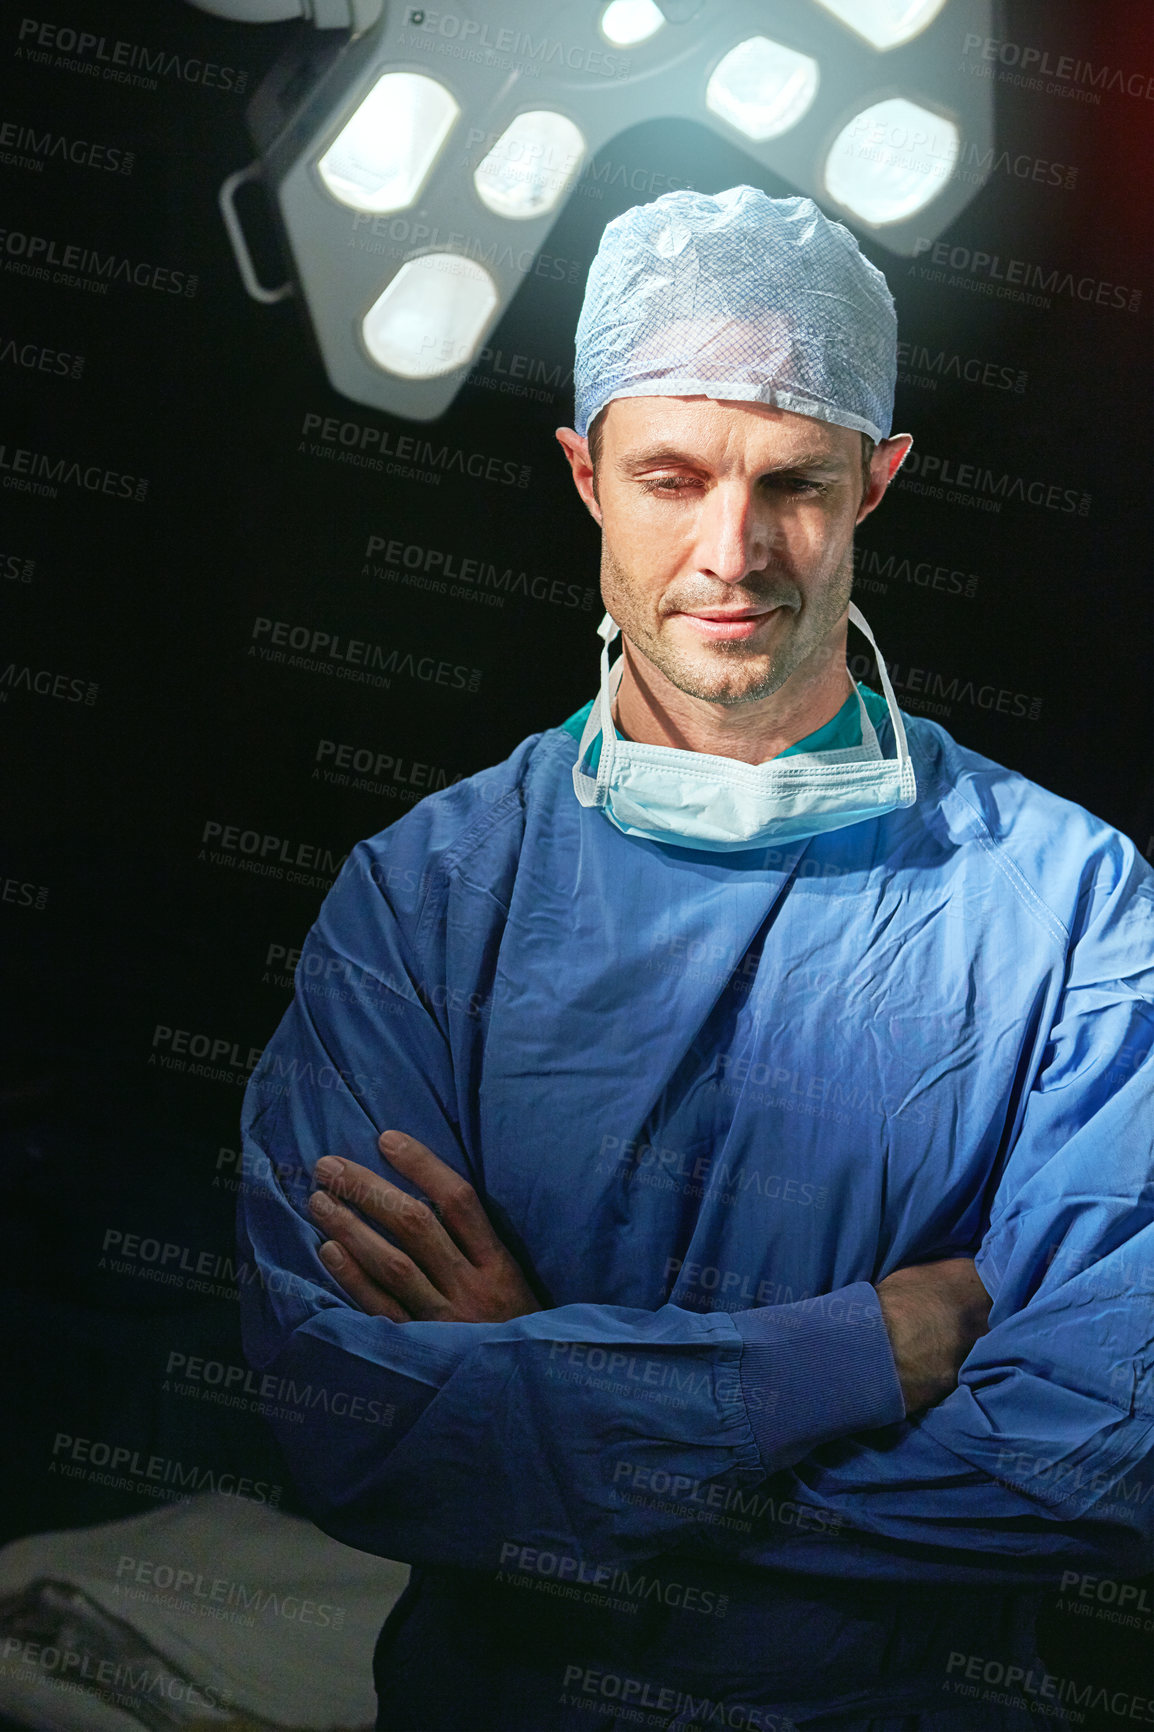 Buy stock photo Cropped portrait of a male doctor against a dark background